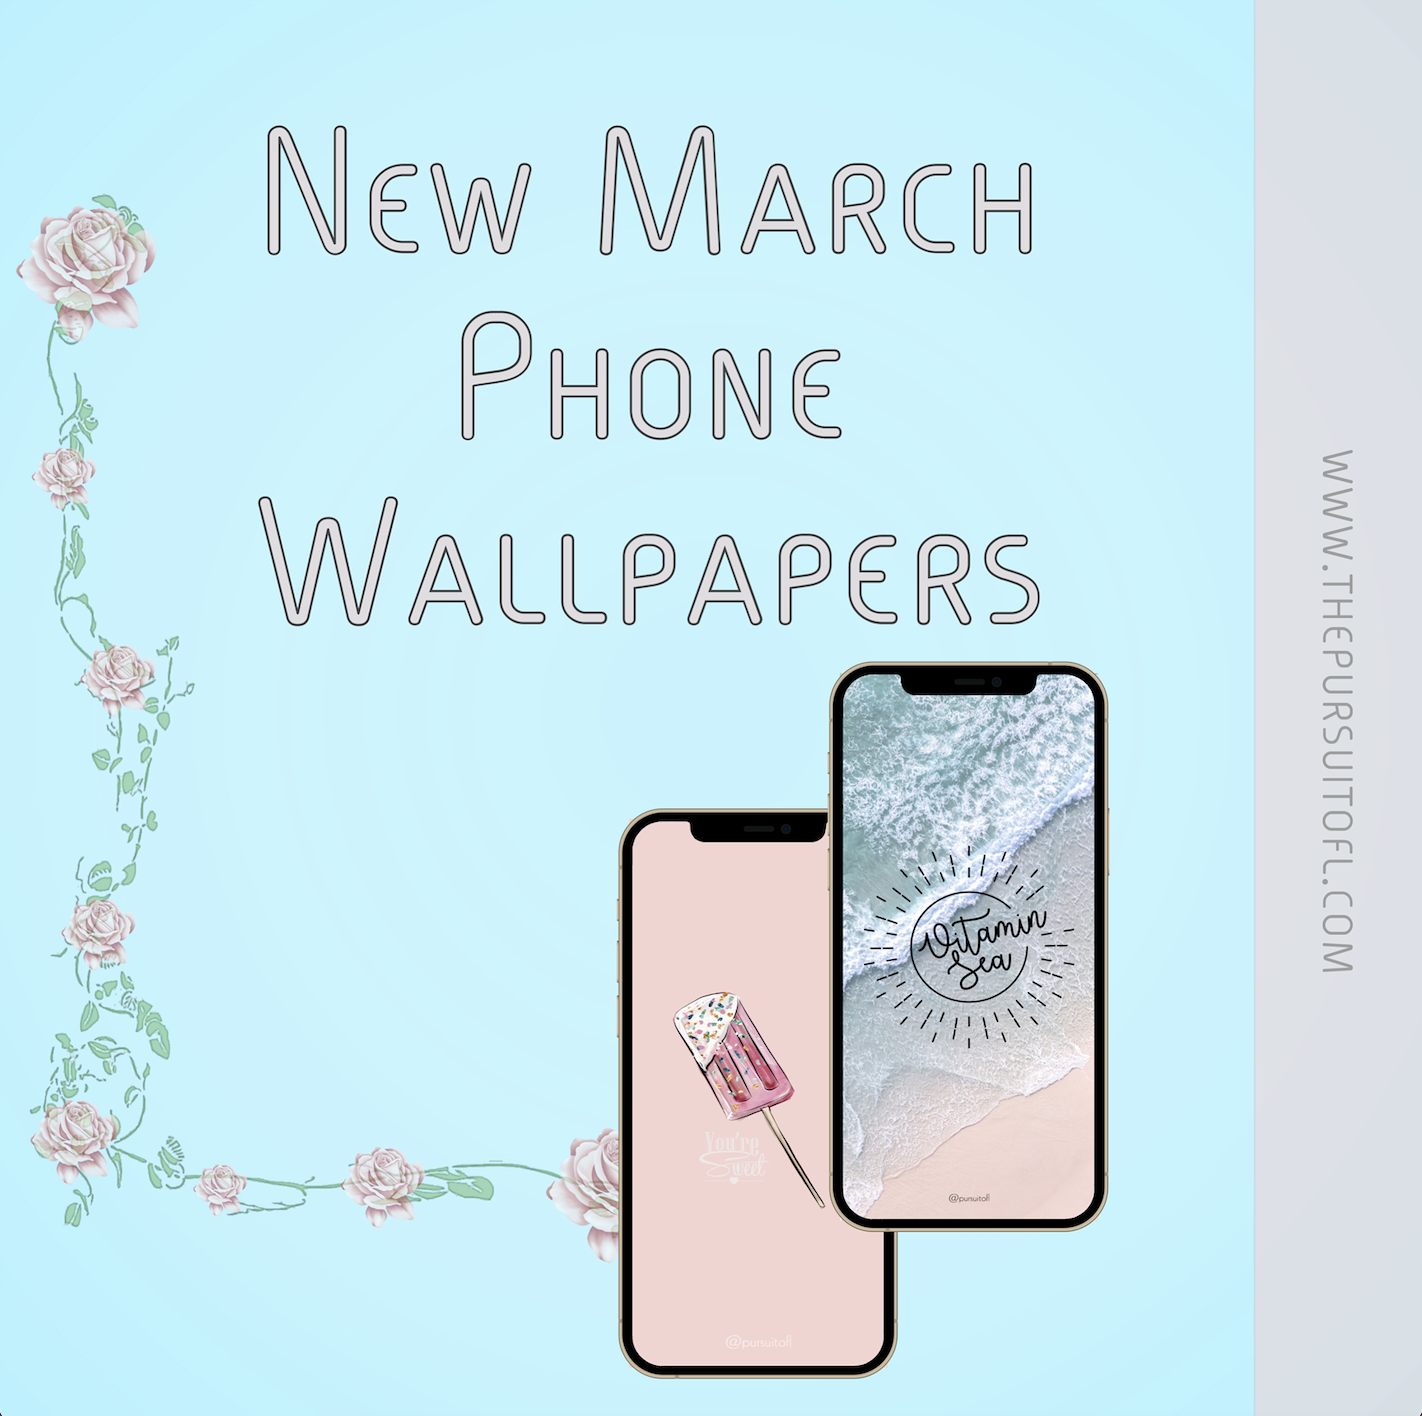 New March Phone Wallpapers, Free